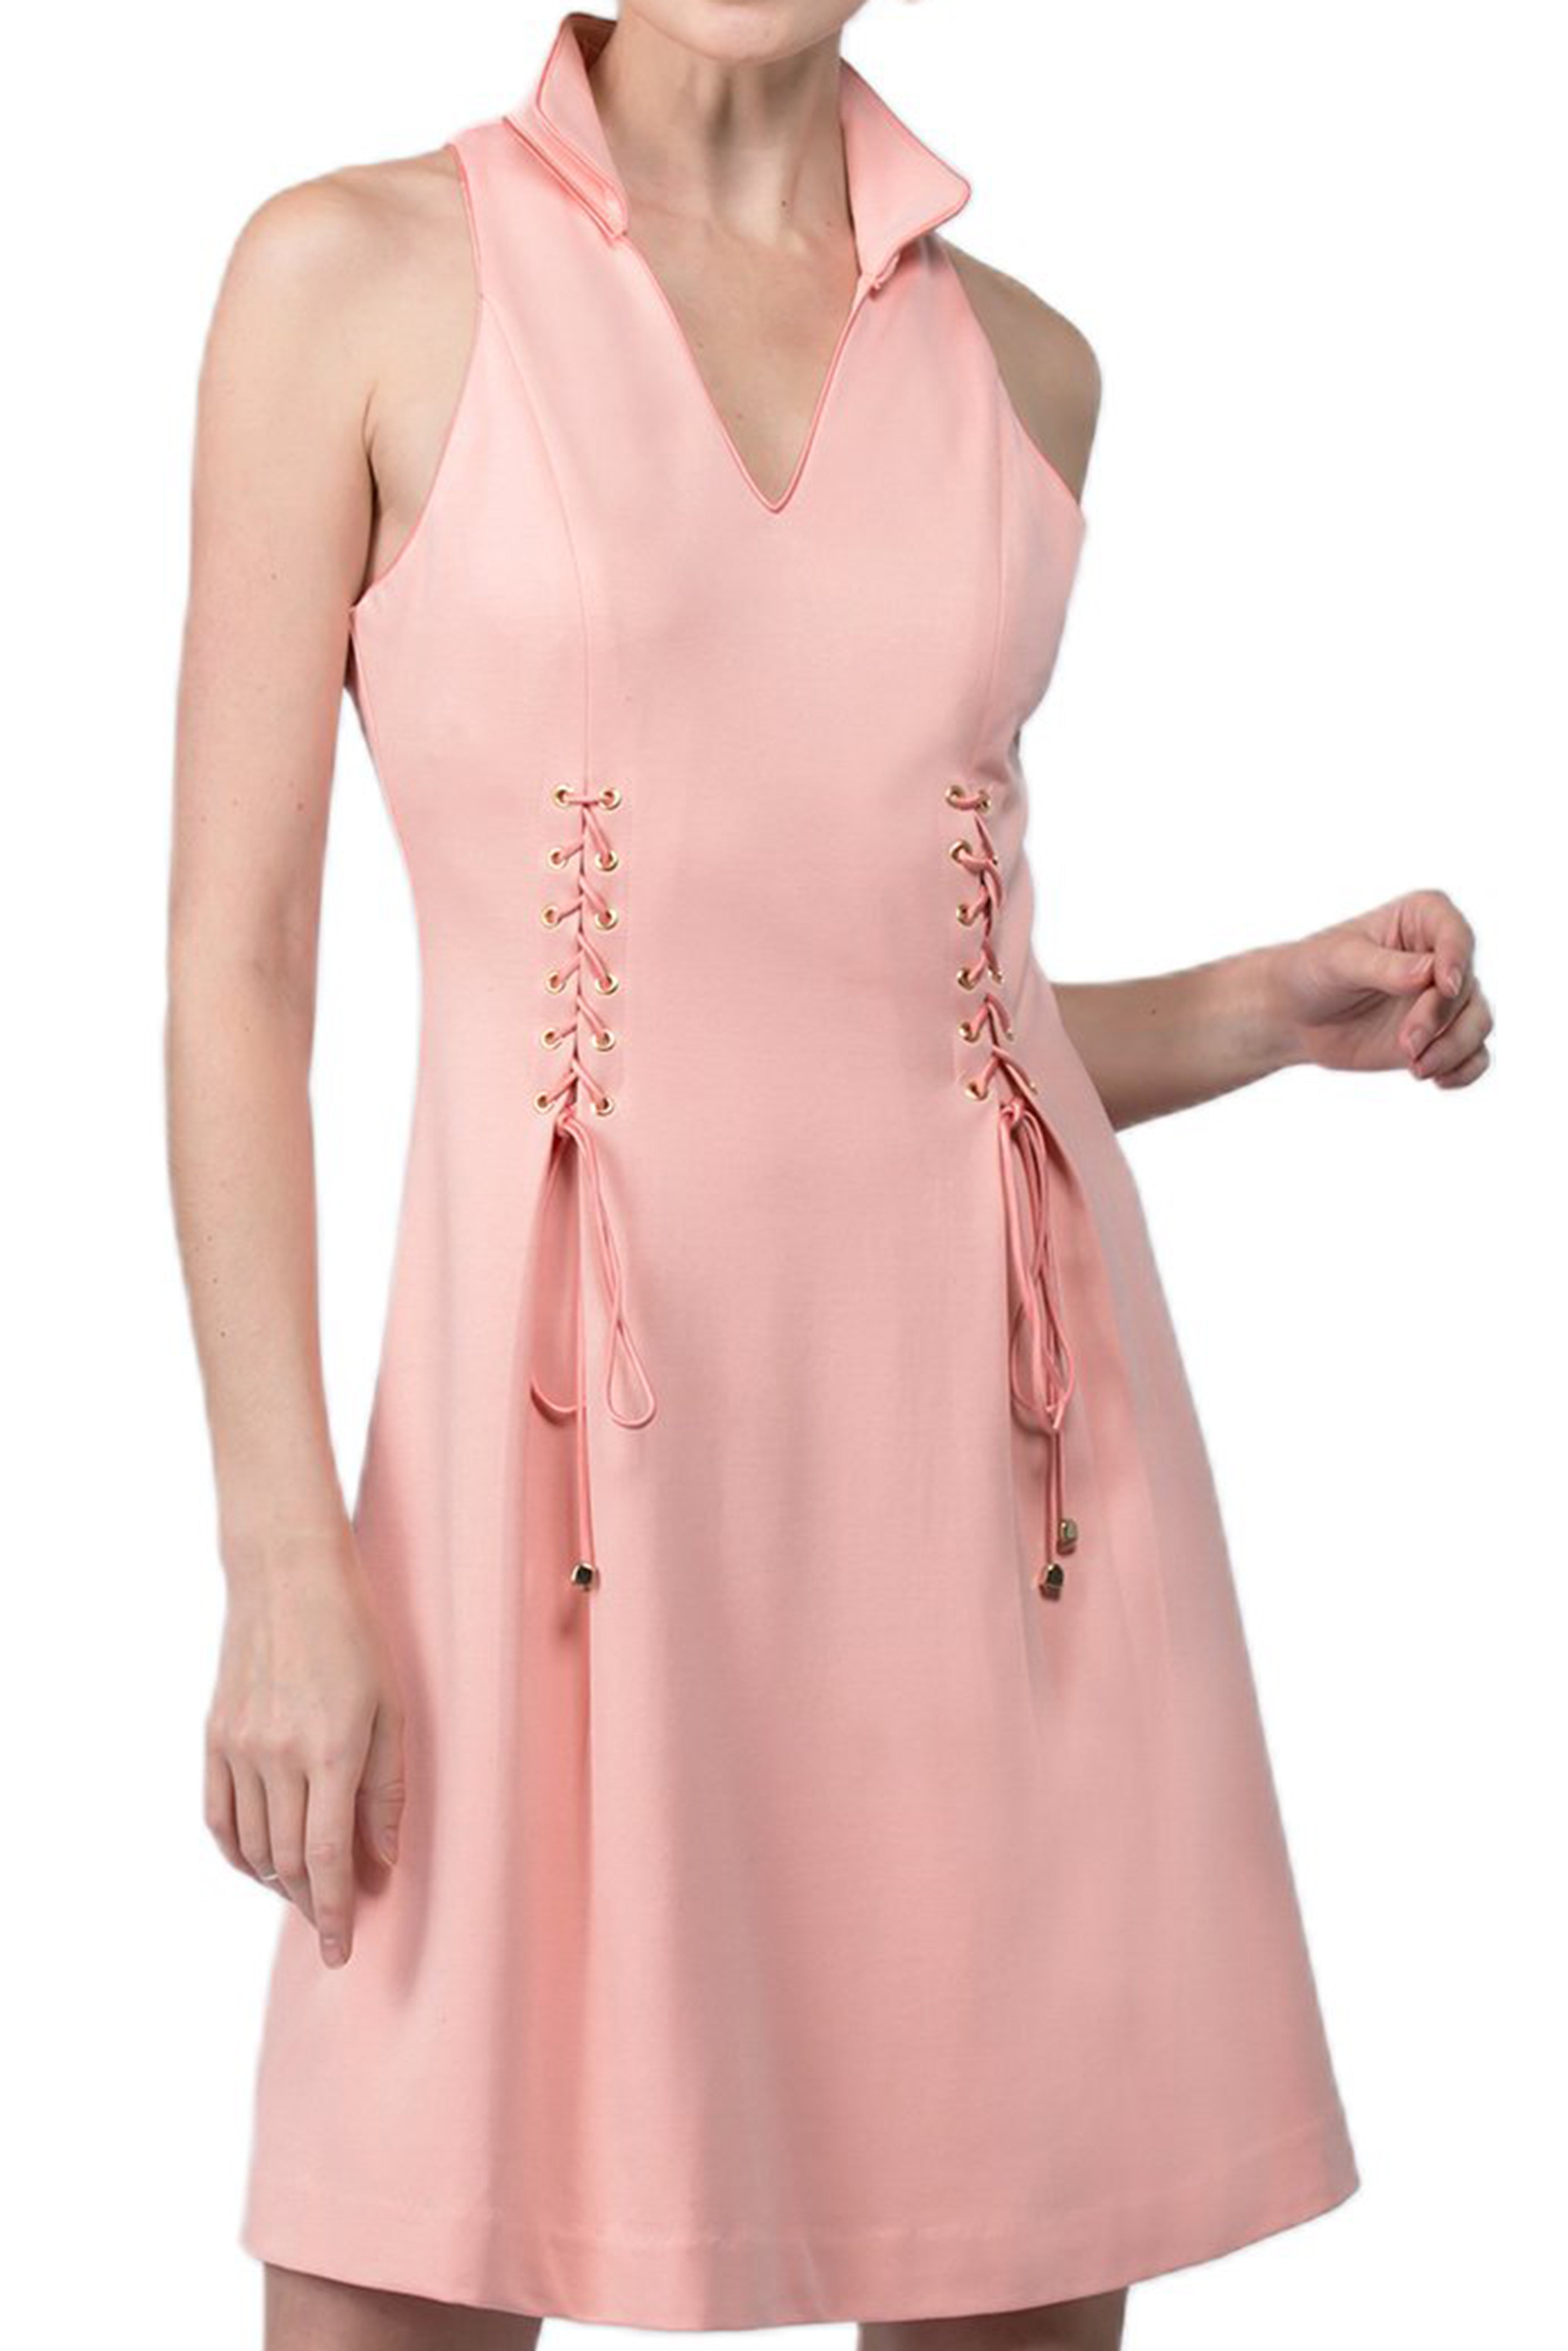 Close-up view of model wearing sleeveless racer neck peachy pink short fit and flare wing tip collar dress with corset lace up ties at front waist.